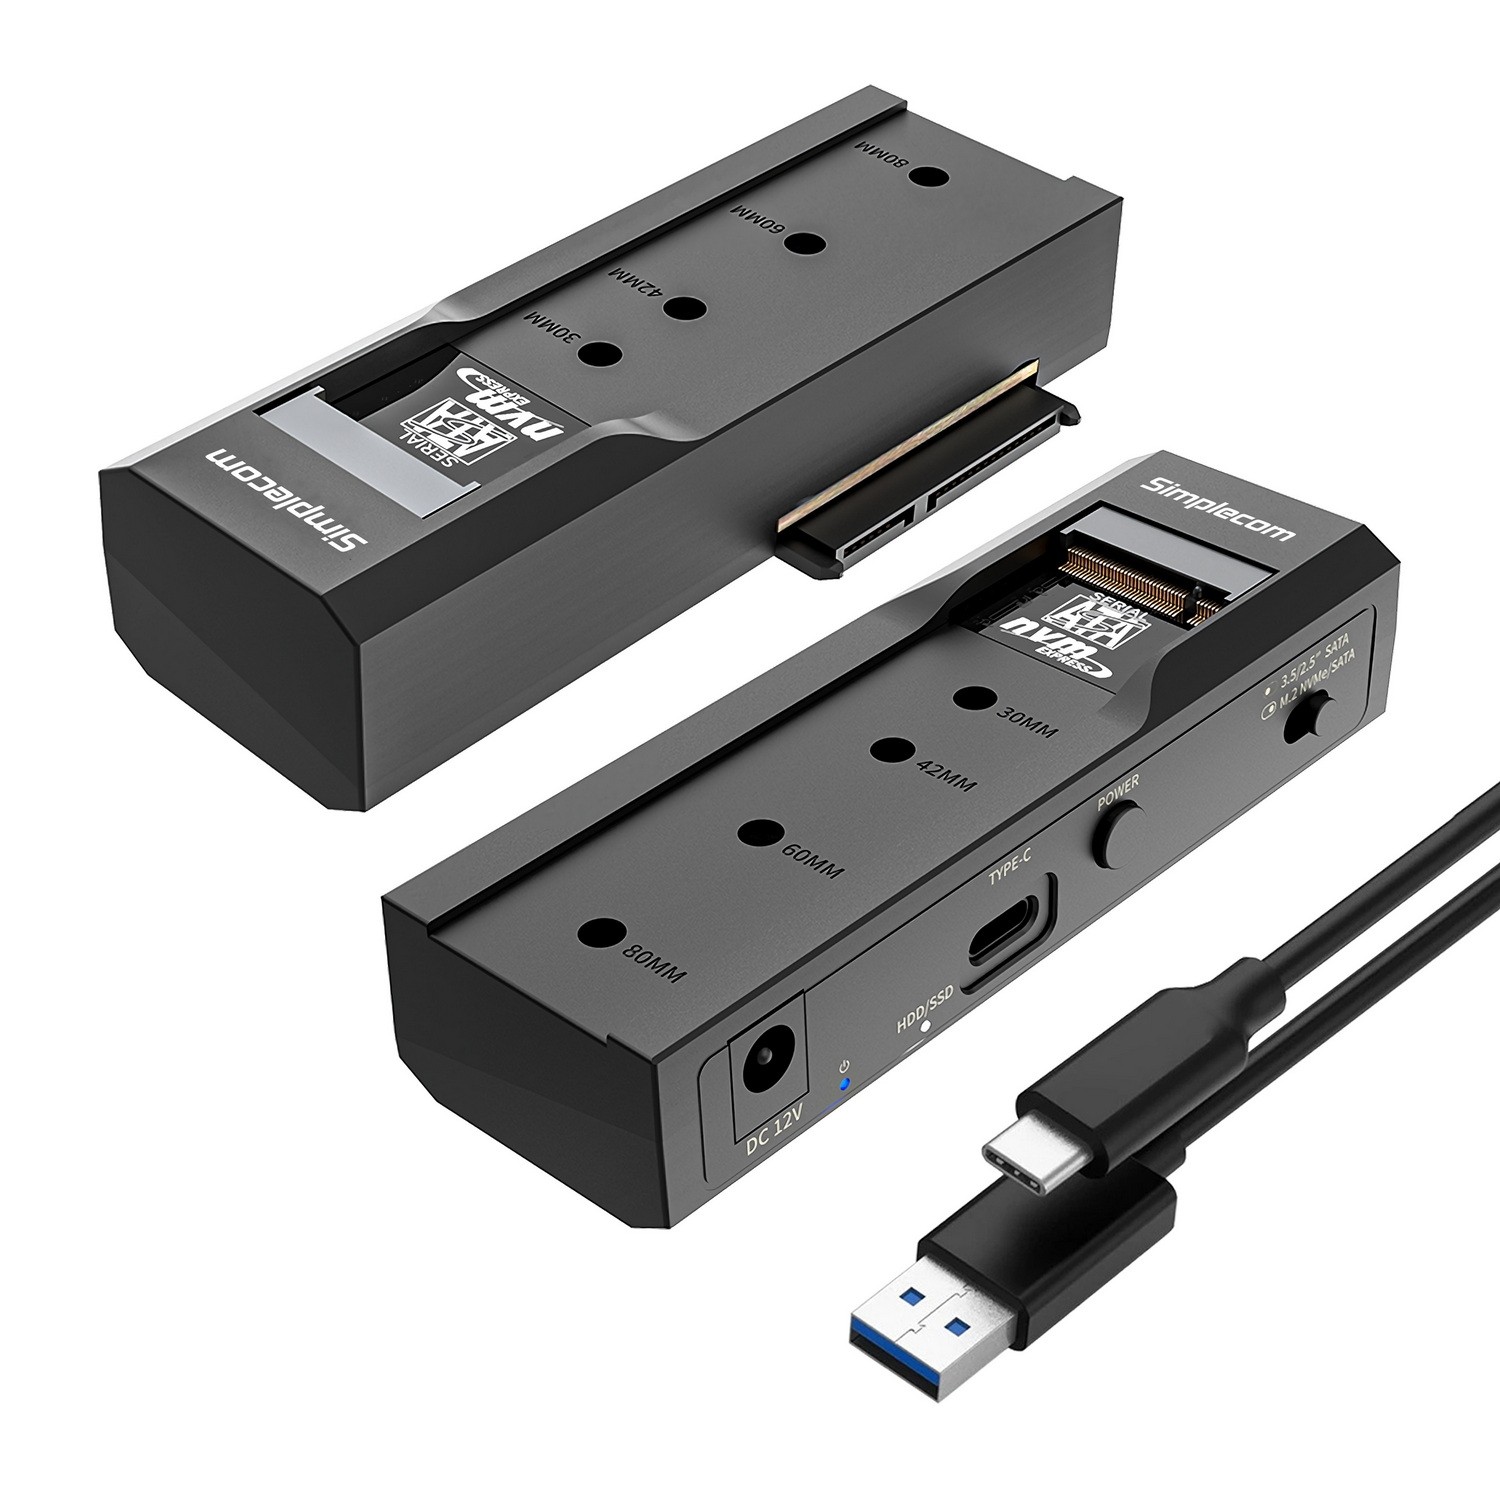 Simplecom, SA536, USB, to, M.2, and, SATA, 2-IN-1, Adapter, for, 2.5, /3.5, HDD, &, NVMe/SATA, M.2, SSD, with, Power, Supply, USB, 3.2, Gen2, 